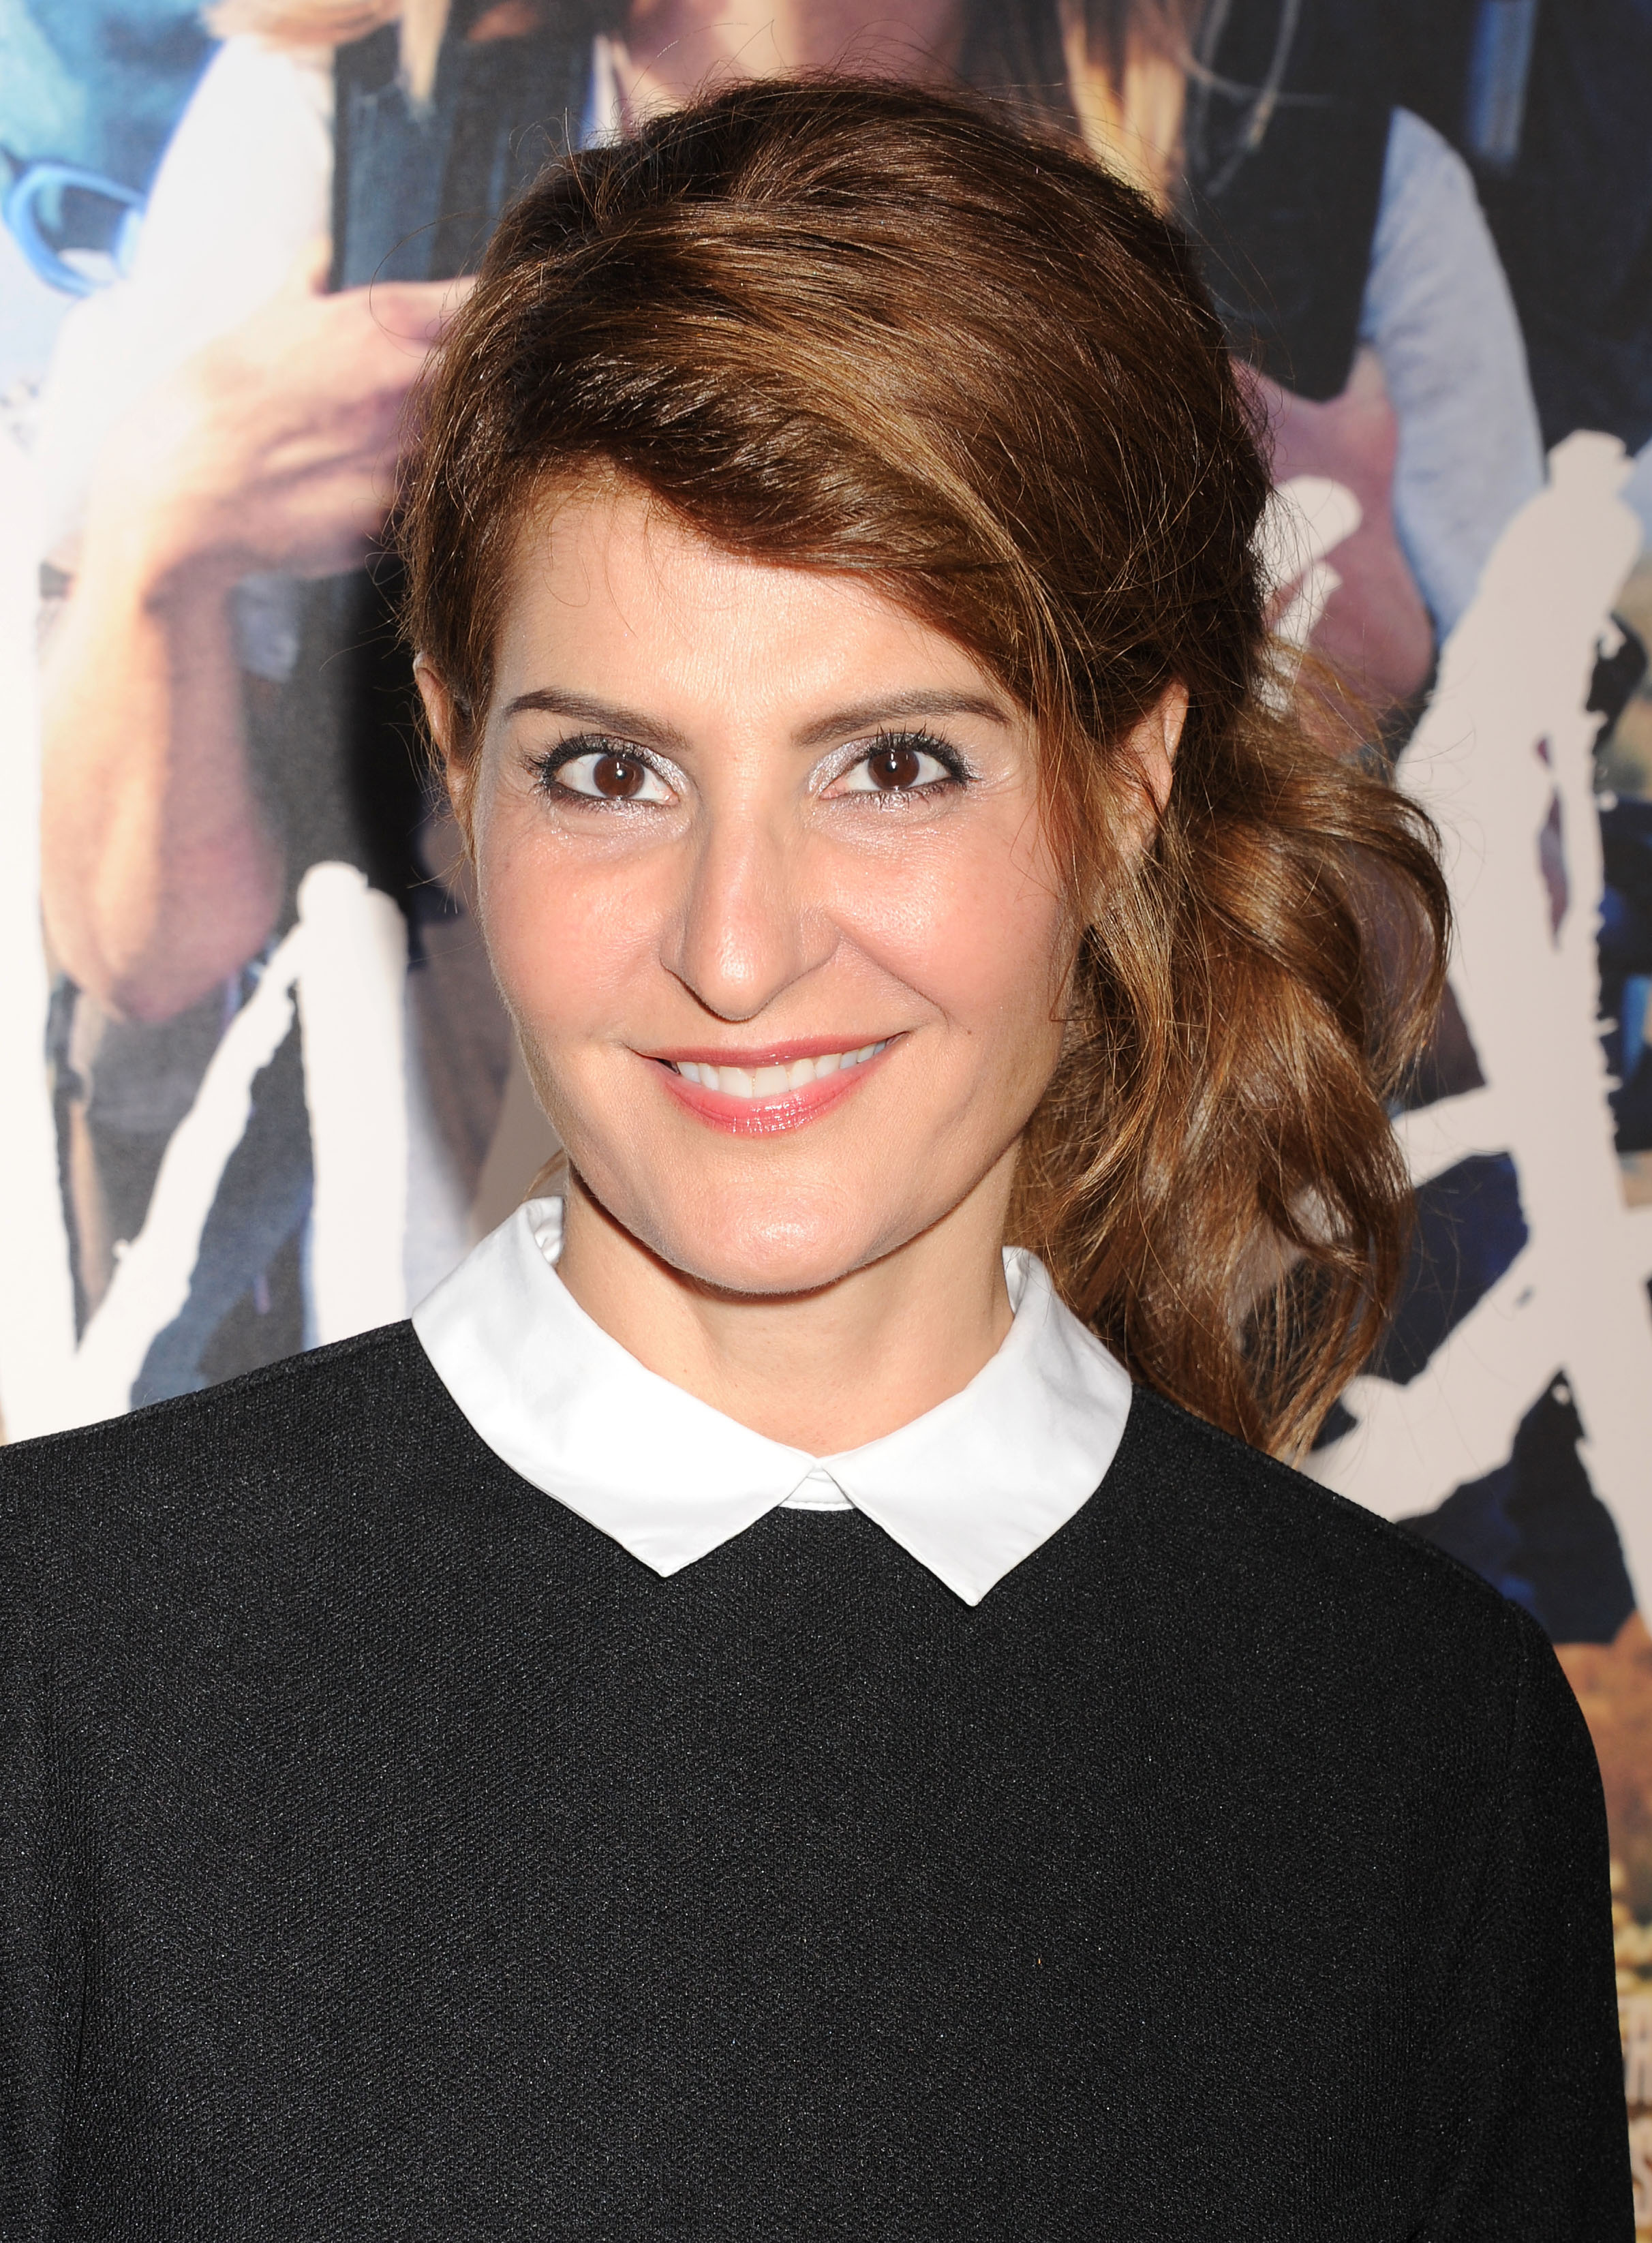 Nia Vardalos On Adopting Her Daughter “i M So Grateful And Can’t Imagine Life Without Her